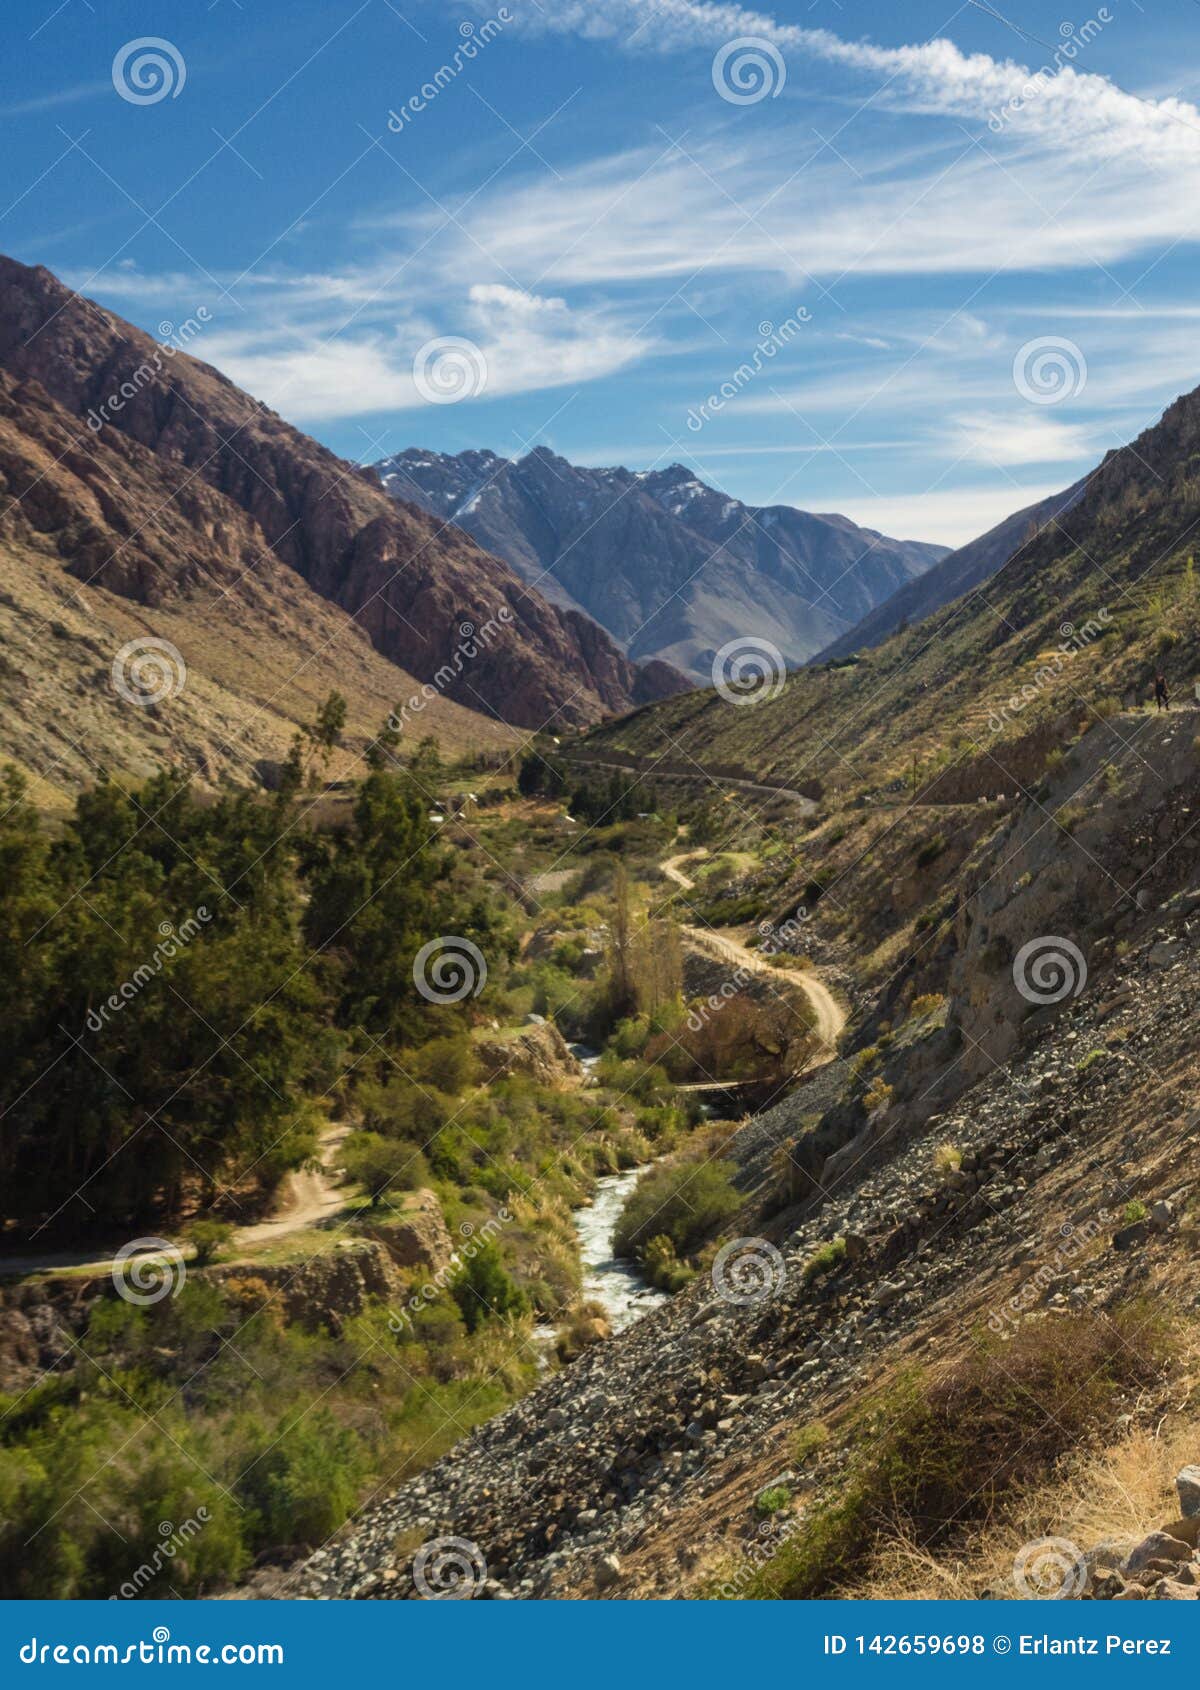 valley of the cochiguaz river in the elqui valley, chile